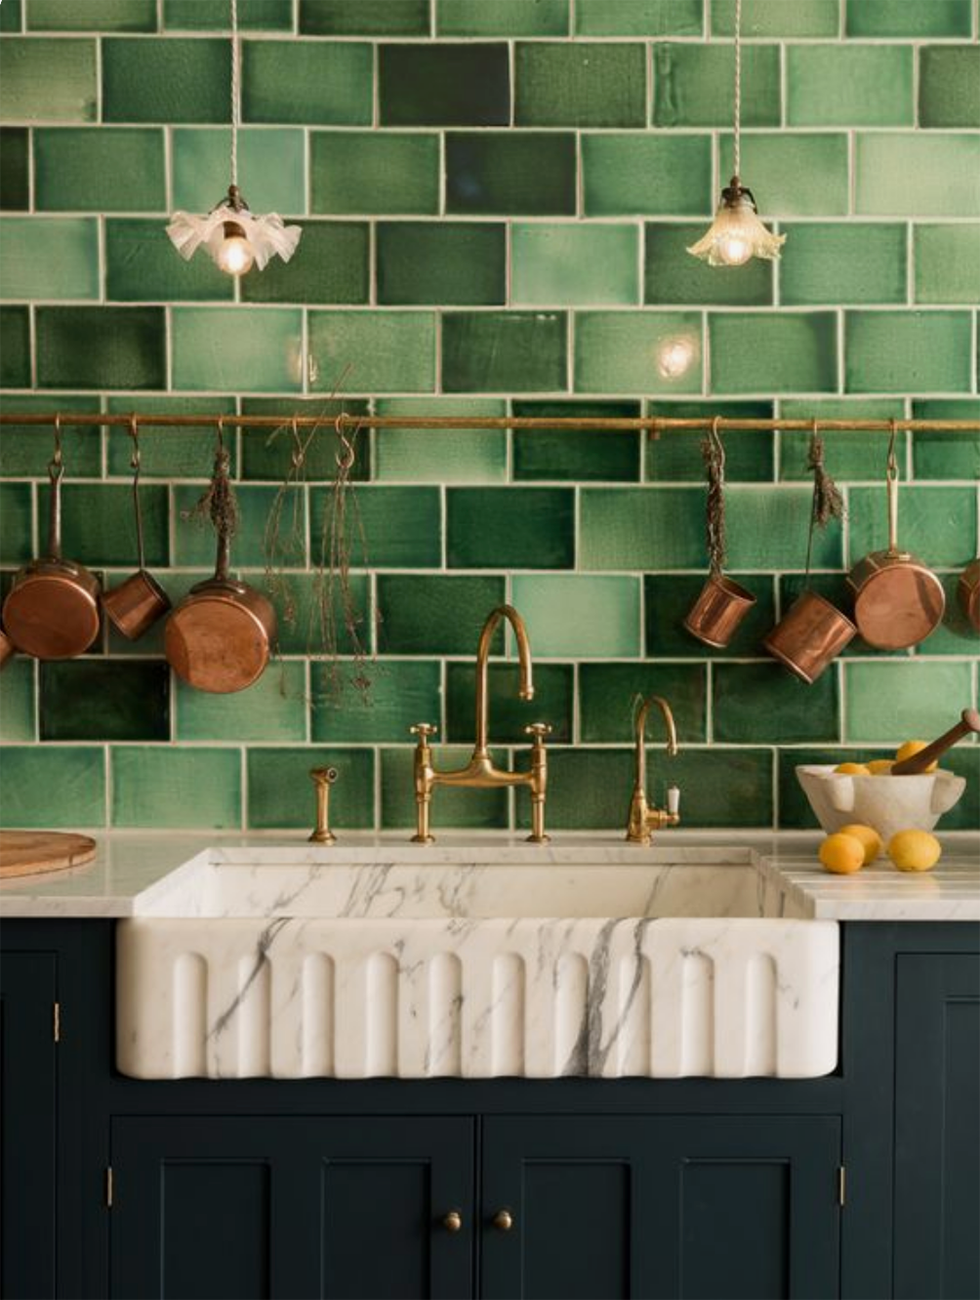 Classic dark green lacquer kitchen with light green tile backsplash. Small brass details as handles and custom marble sink..